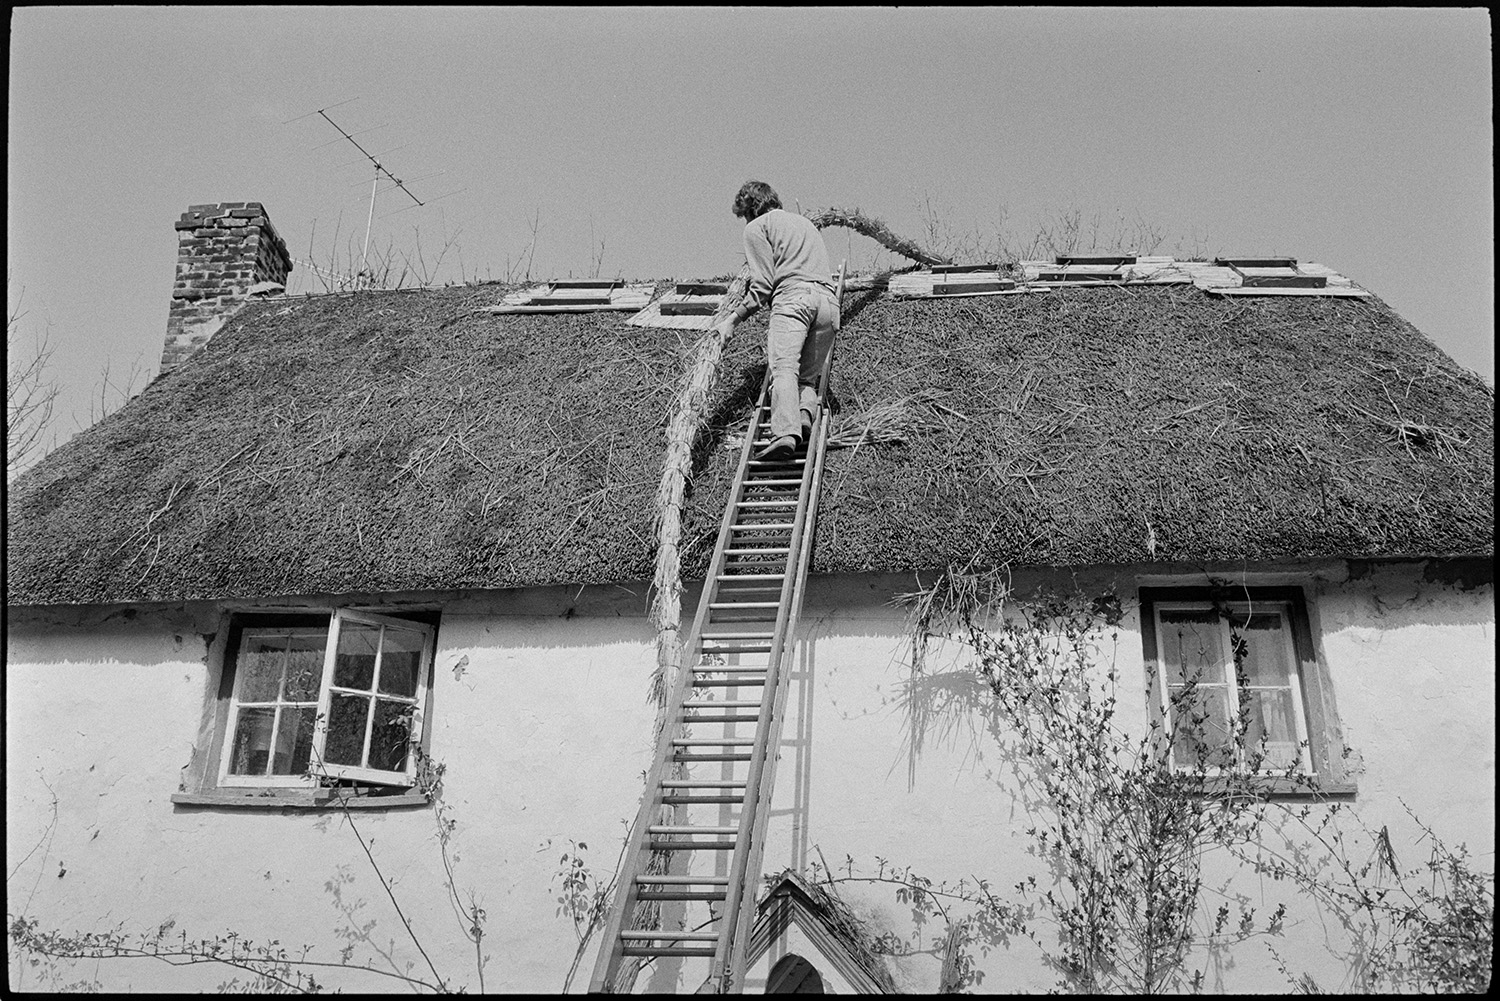 Thatcher thatching ridge of cob cottage, making spars. 
[A man up a ladder thatching the ridge of  a cob cottage at Addisford, Dolton.]